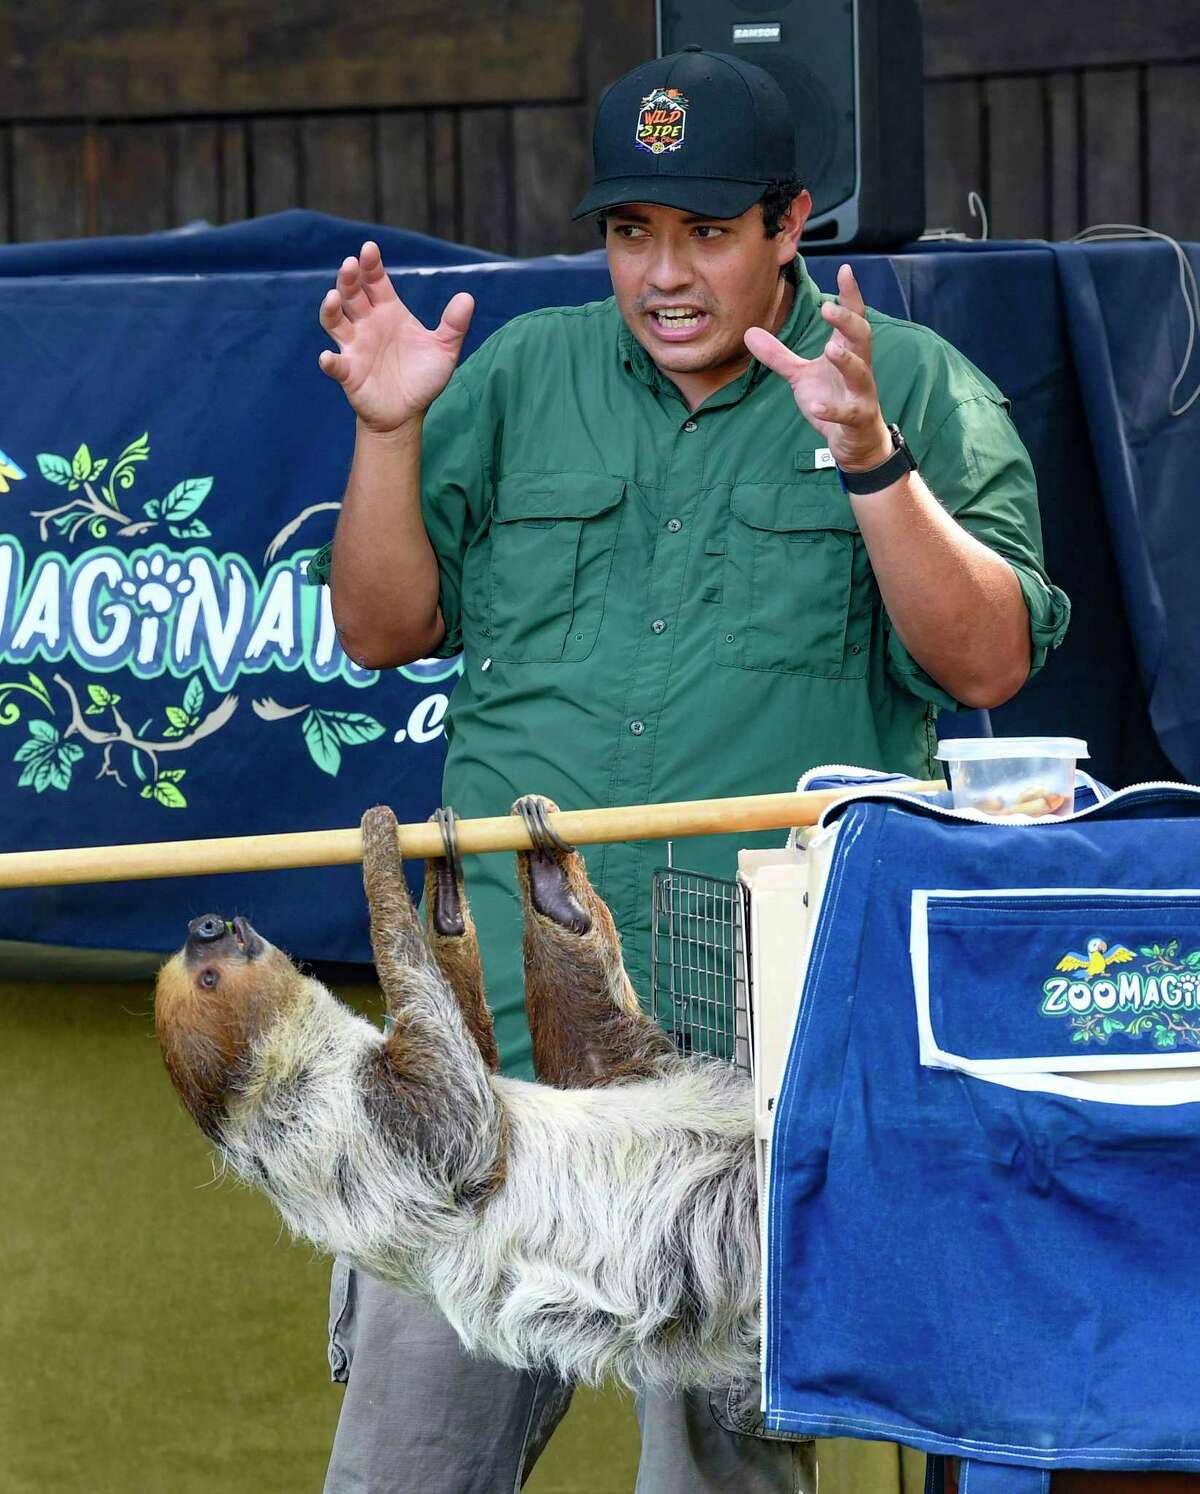 Clay Carabajal explains the behavior of sloths during a show at the Hyatt Hill Country Golf Club on Wednesday, June 9, 2021.